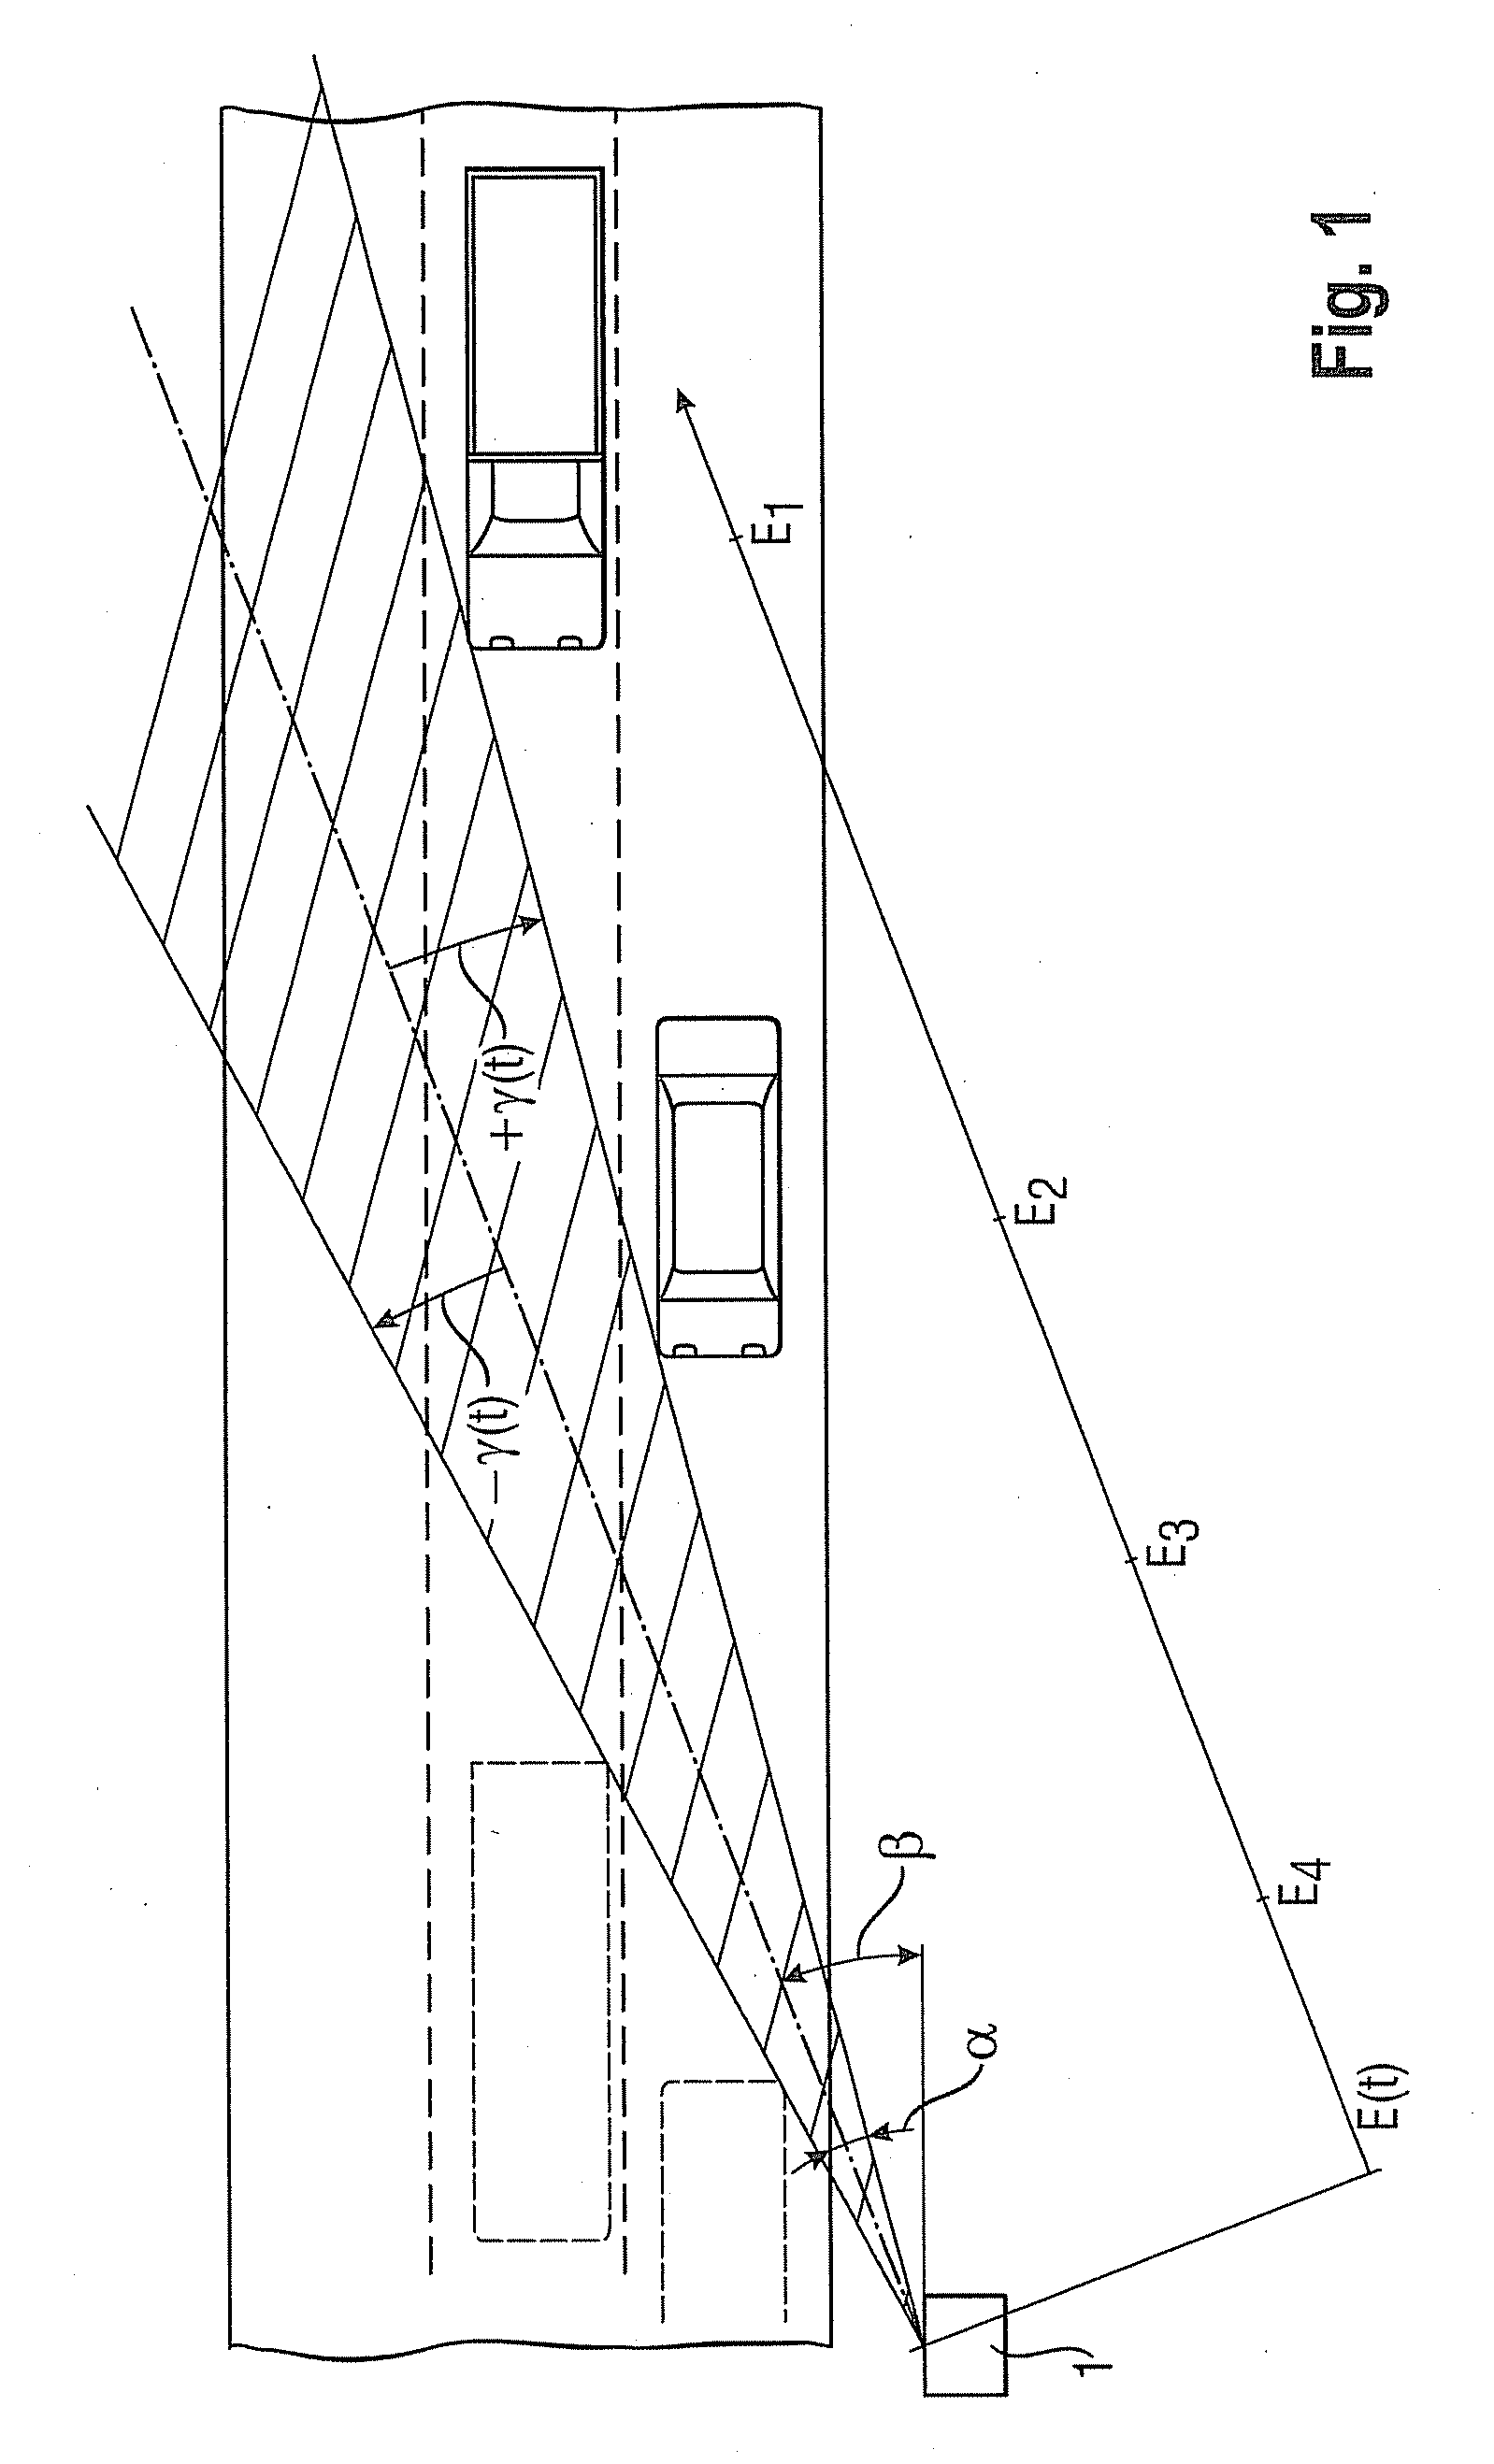 Method of Verifiably Detecting the Speed of a Vehicle